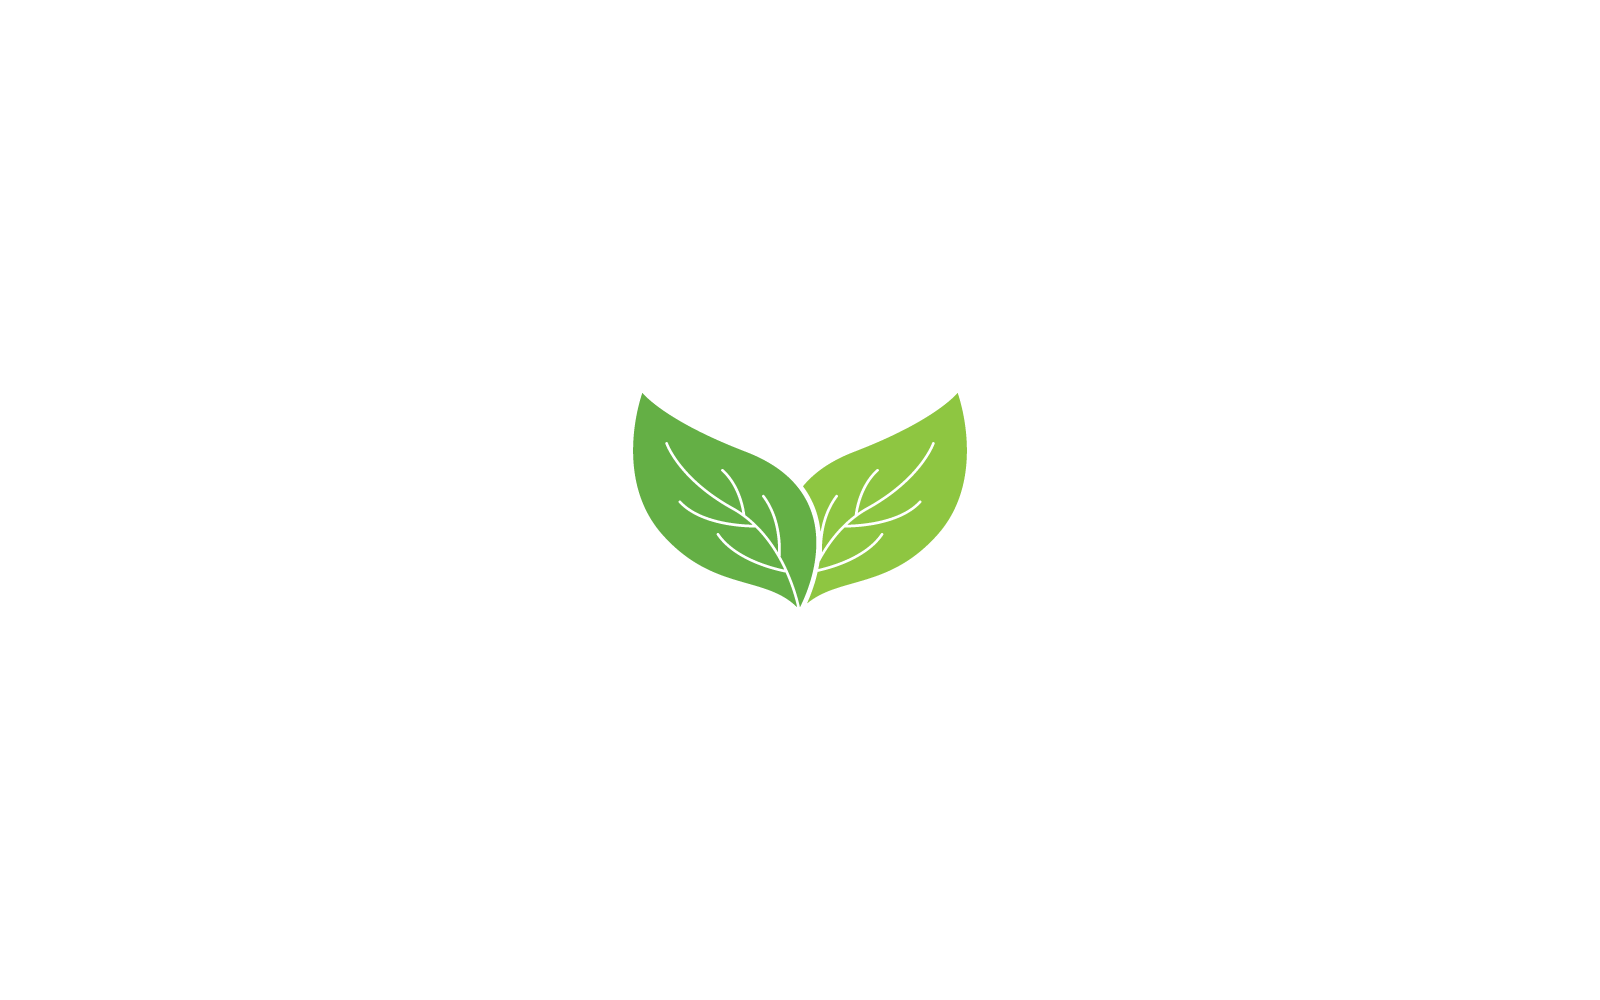 Green leaf logo nature element vector icon